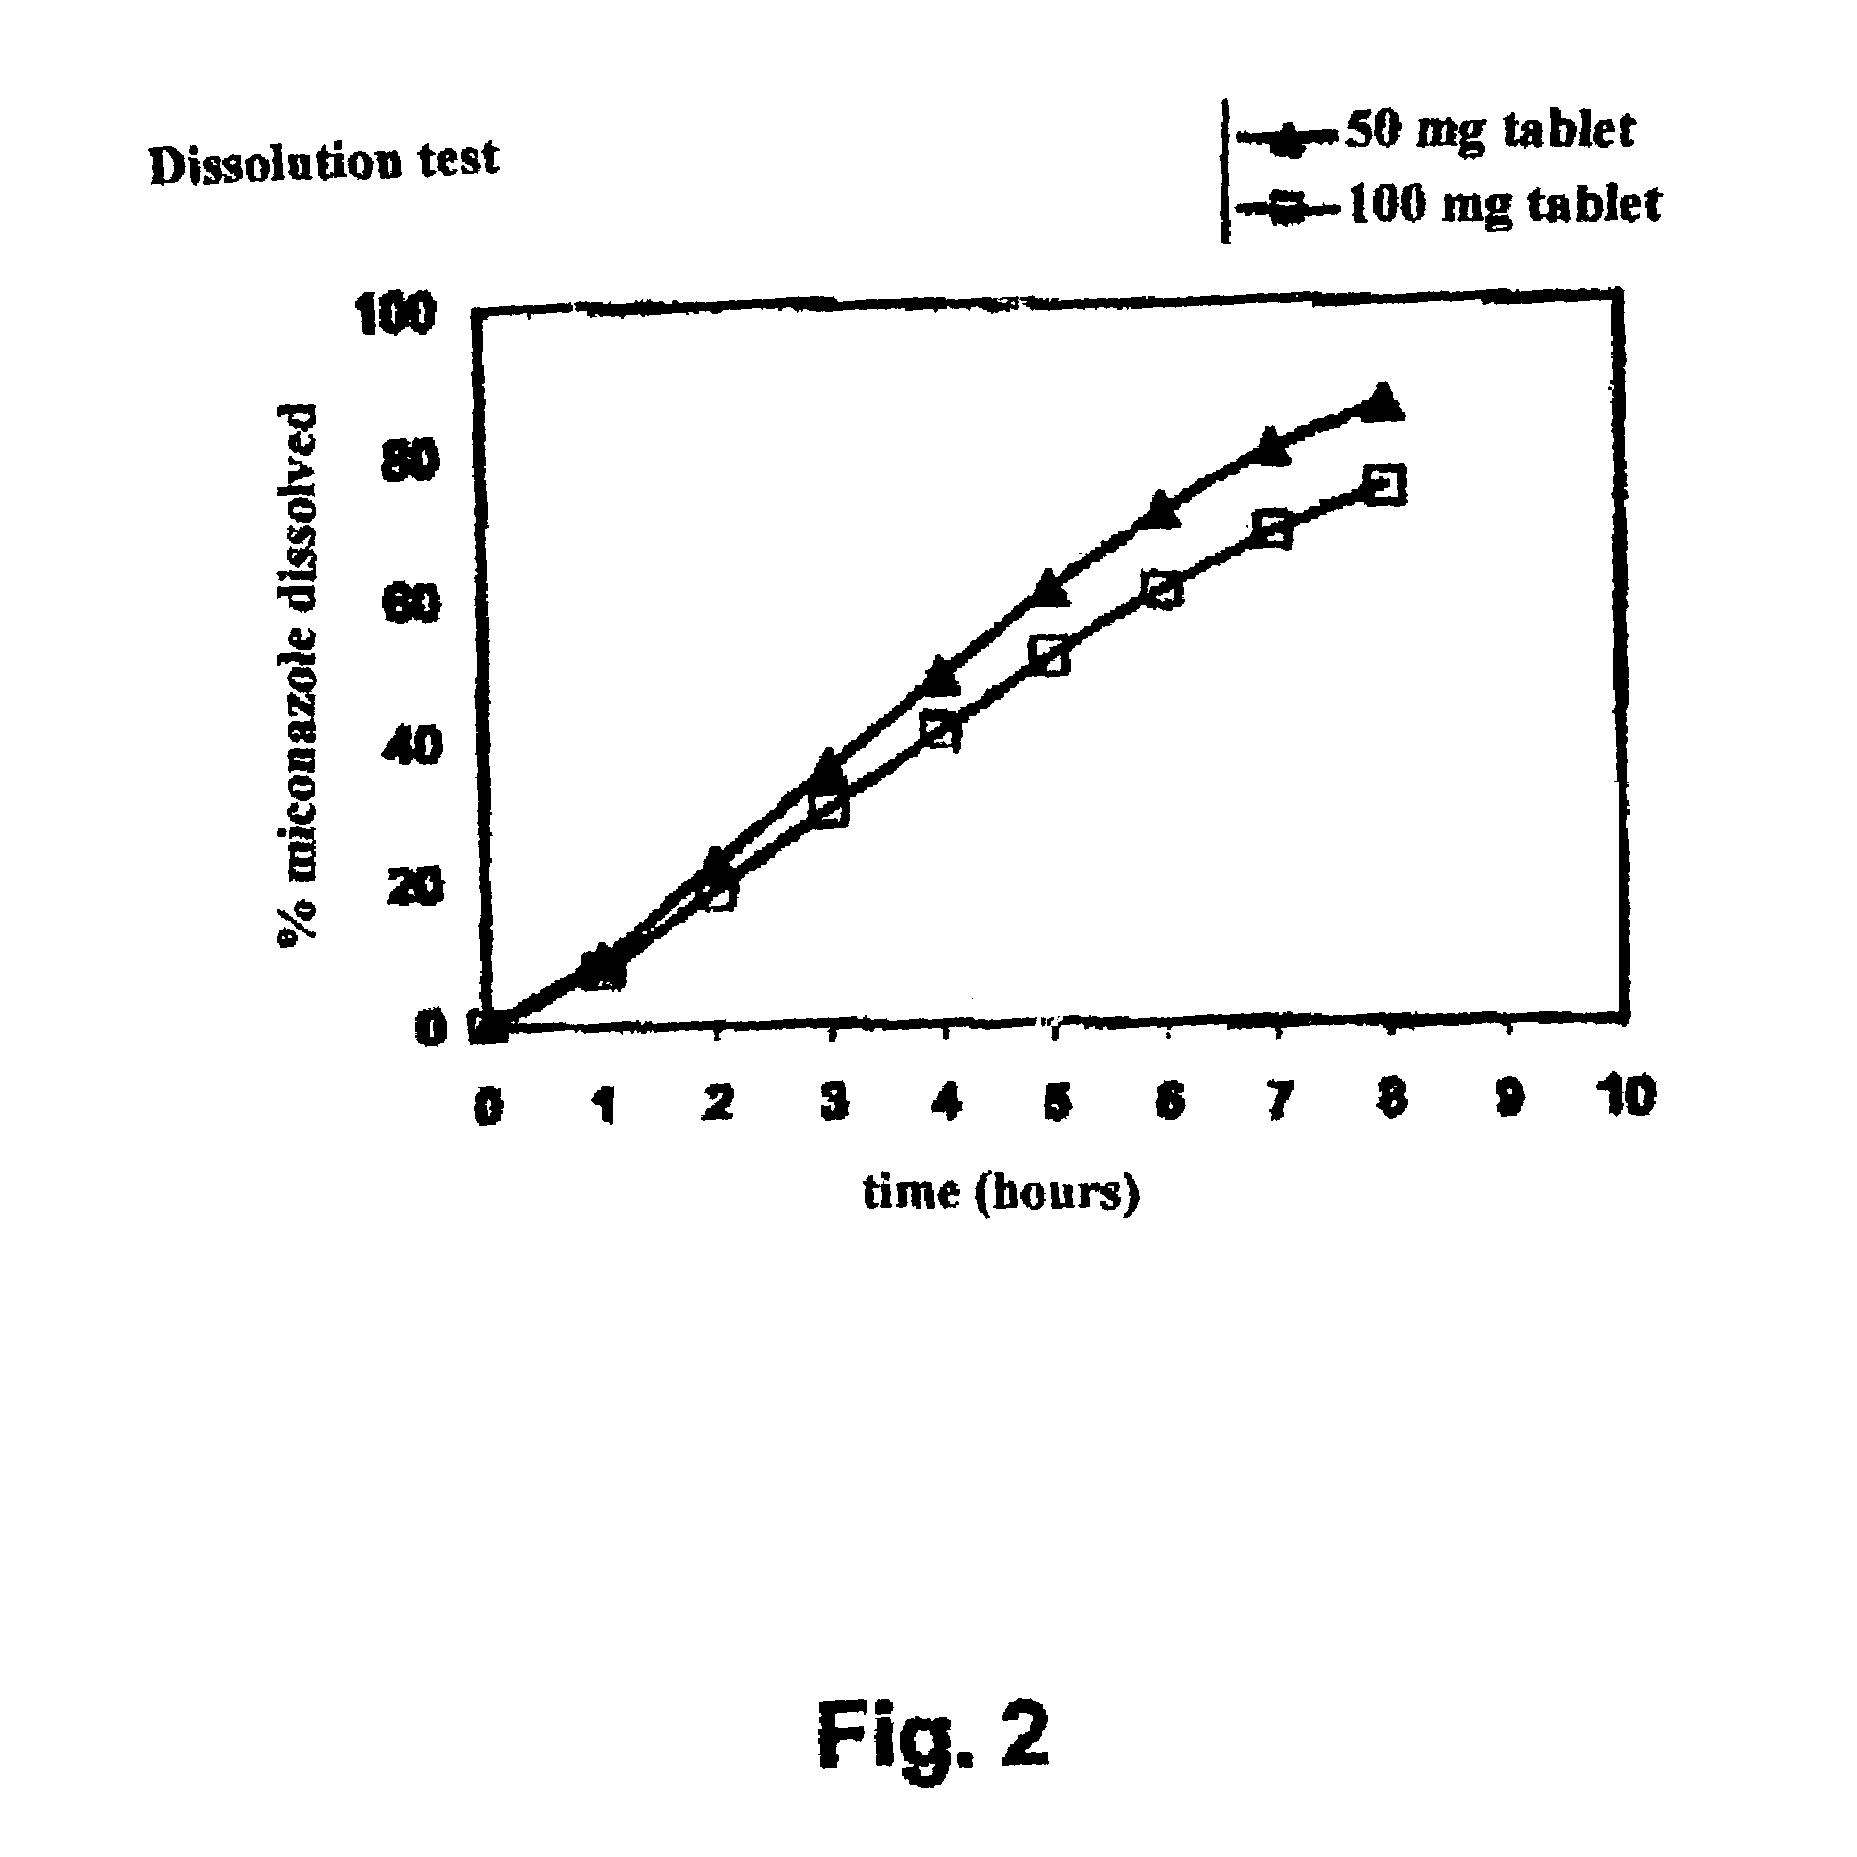 Prolonged release bioadhesive therapeutic systems